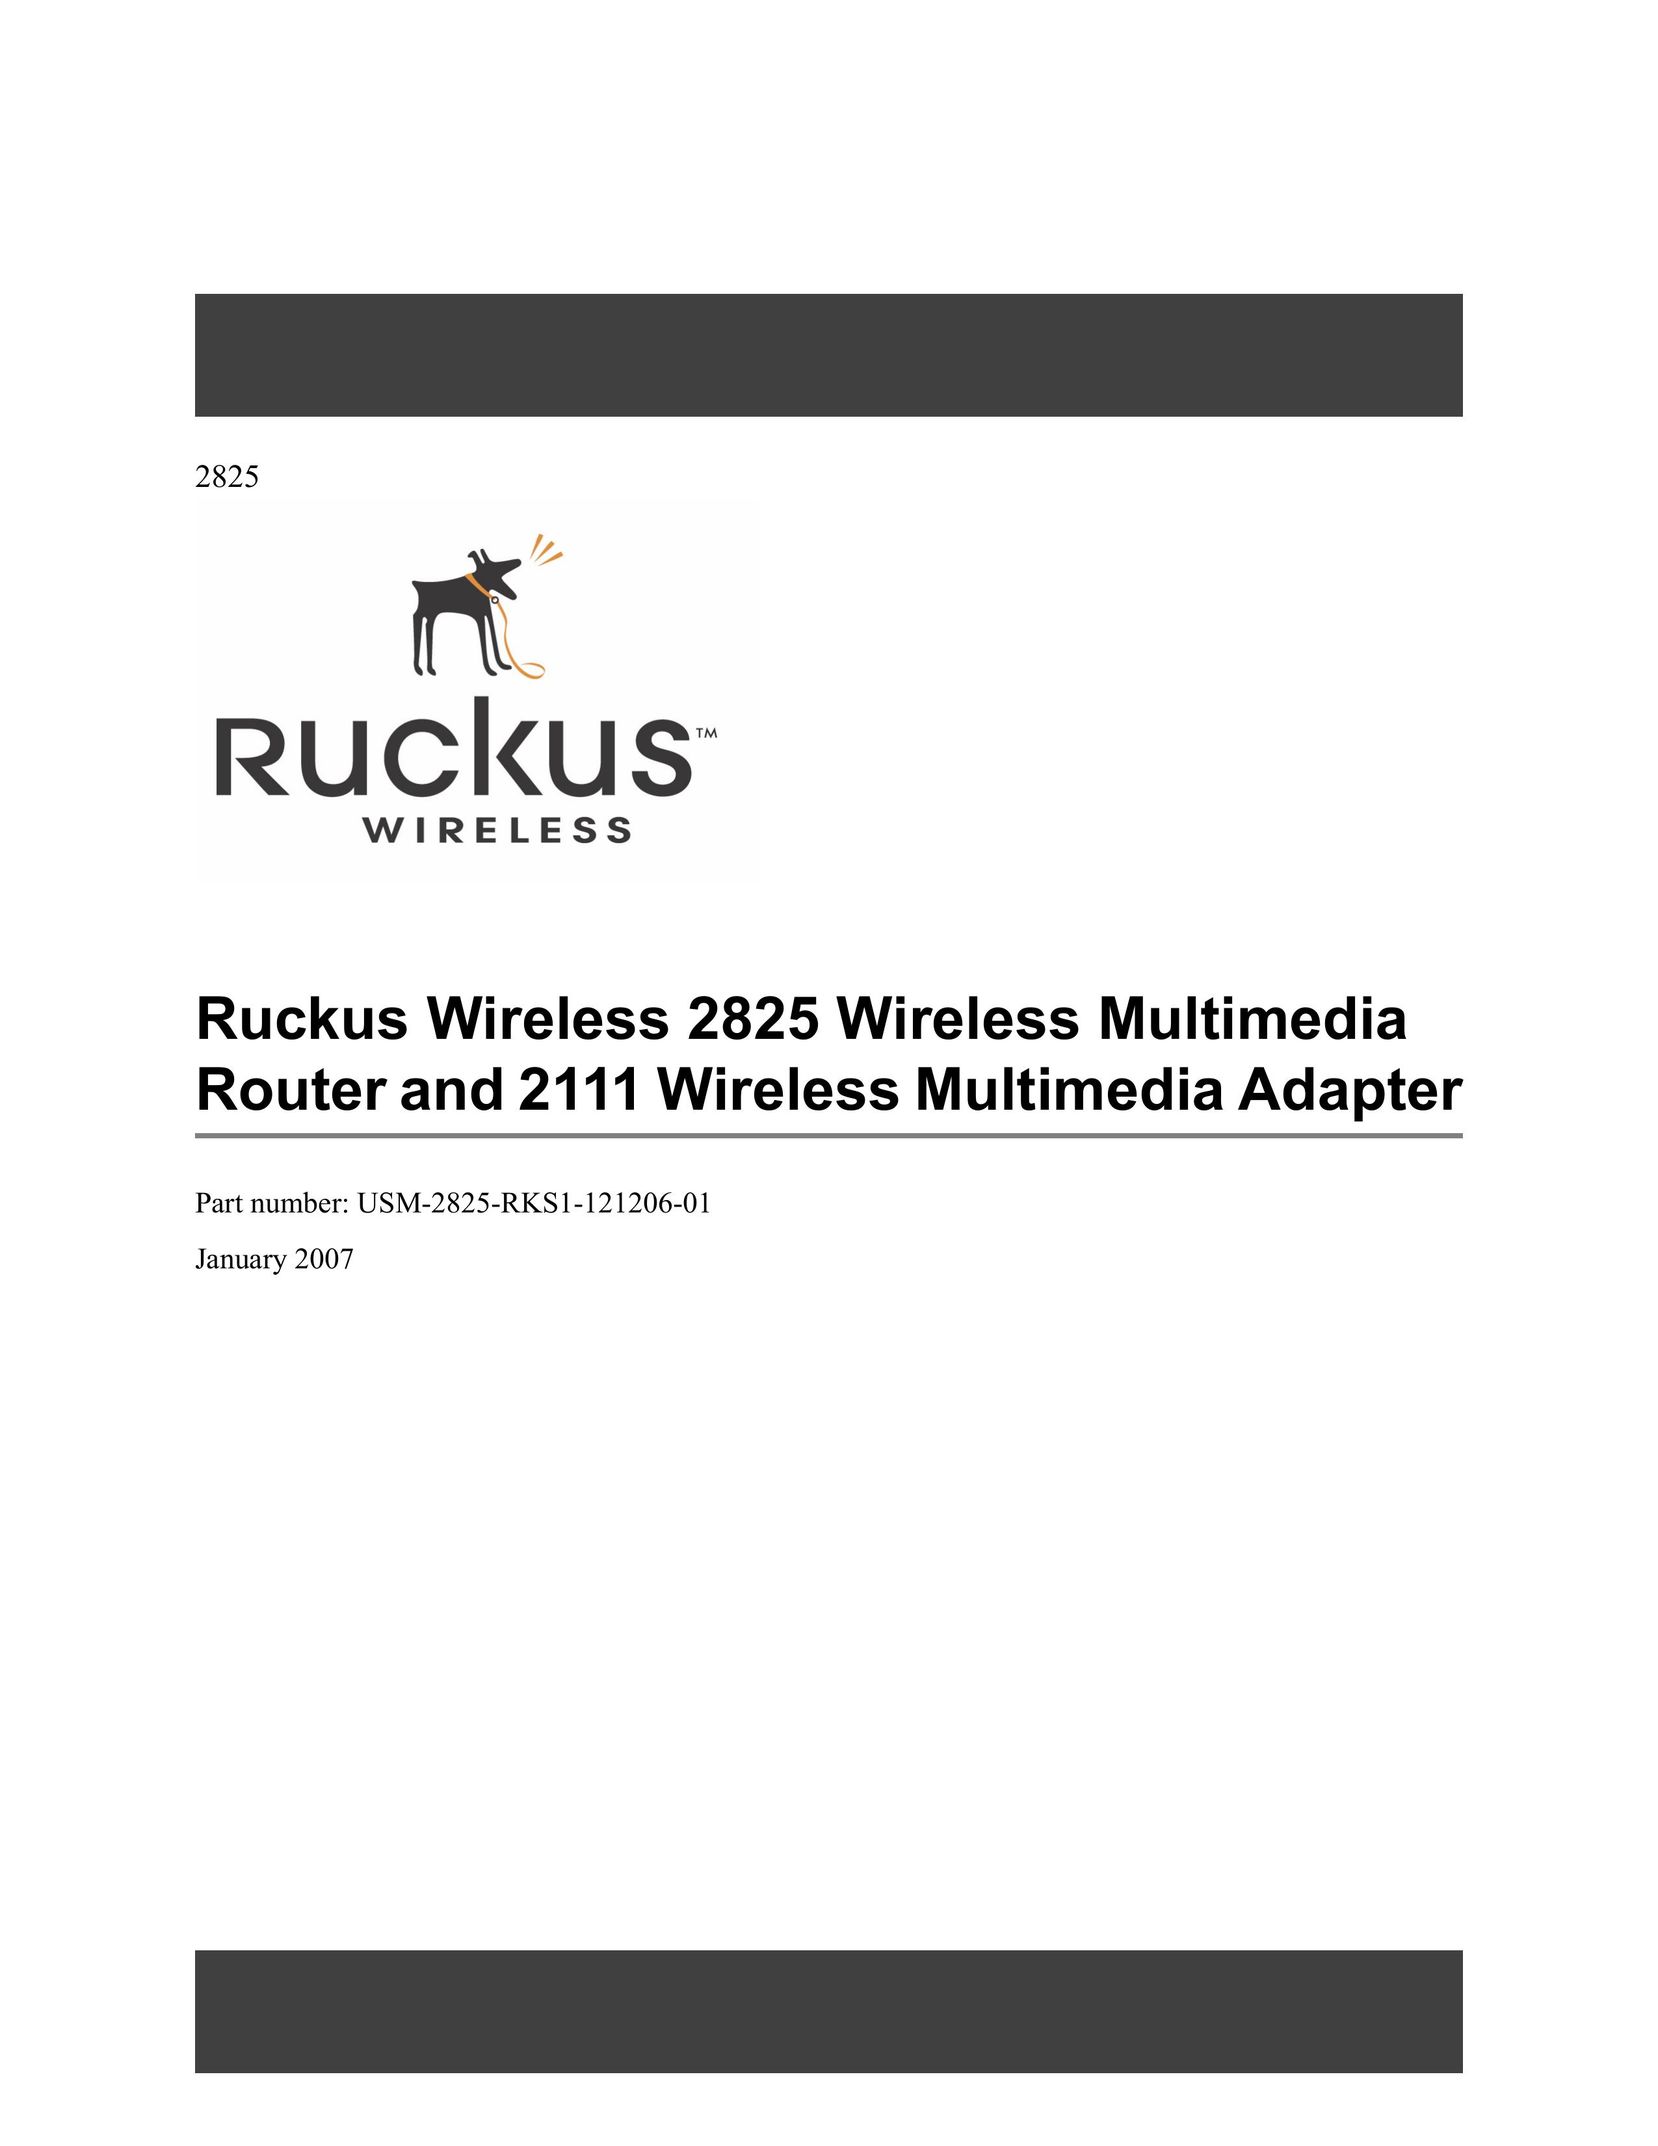 Ruckus Wireless 2111 Network Router User Manual